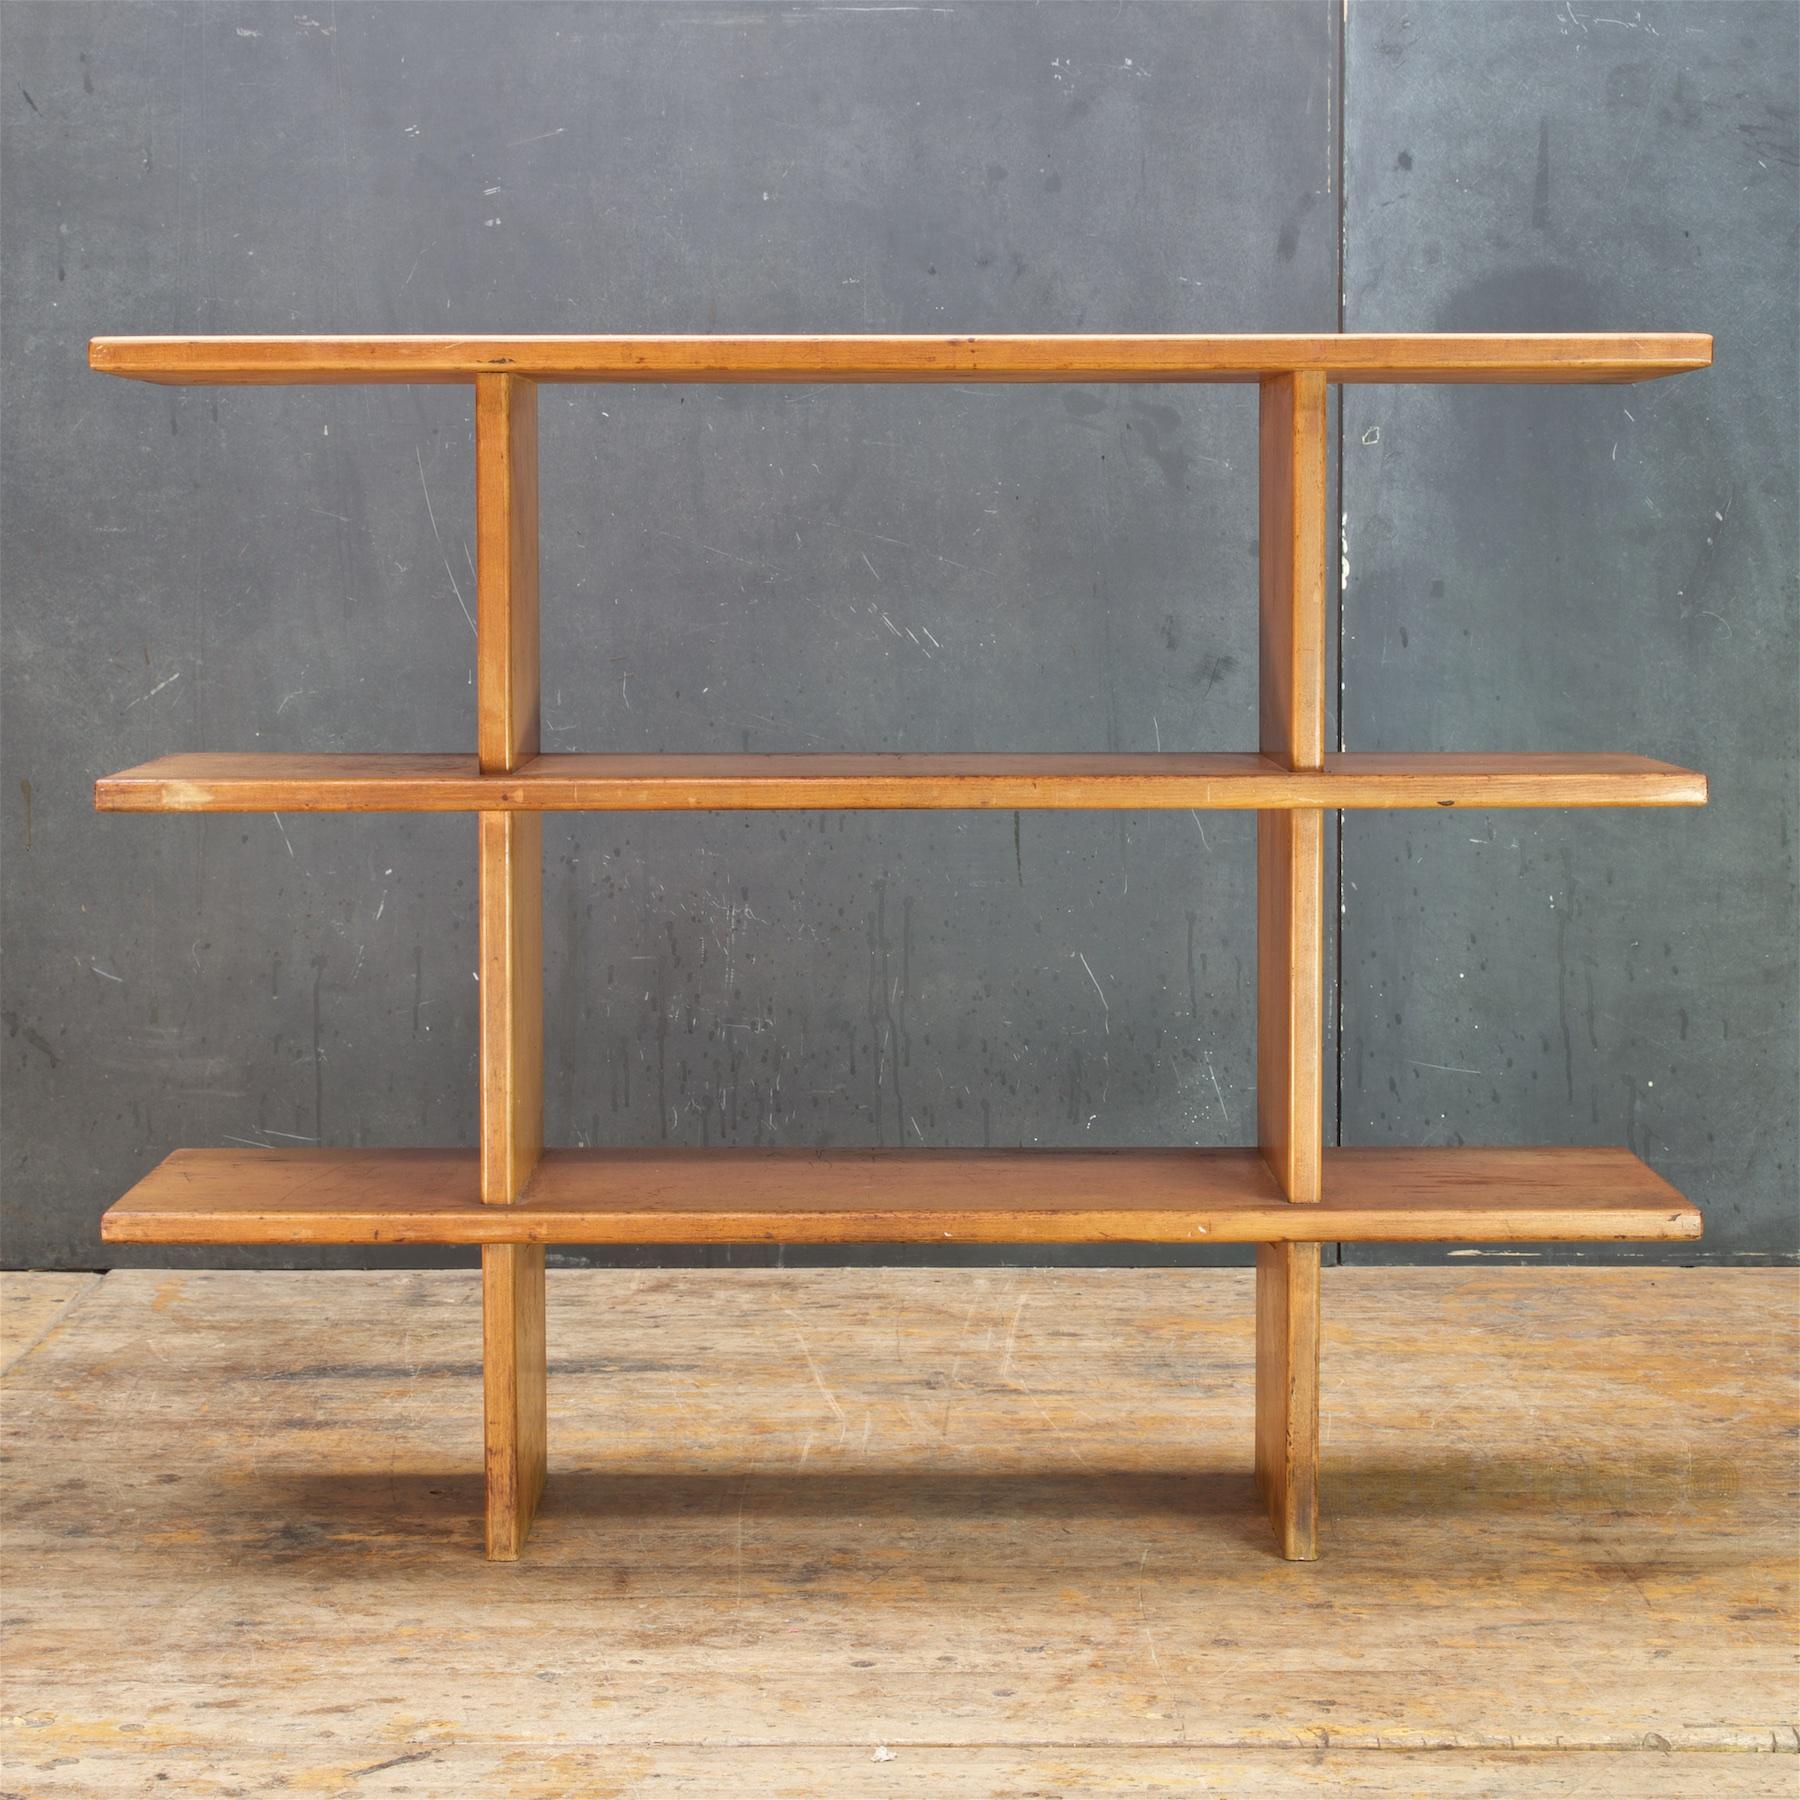 Versatile and sculptural piece of shelving. Presented in original finish, time worn patina. Measures: Shelf heights are 9, 19.5 and 30 inches.